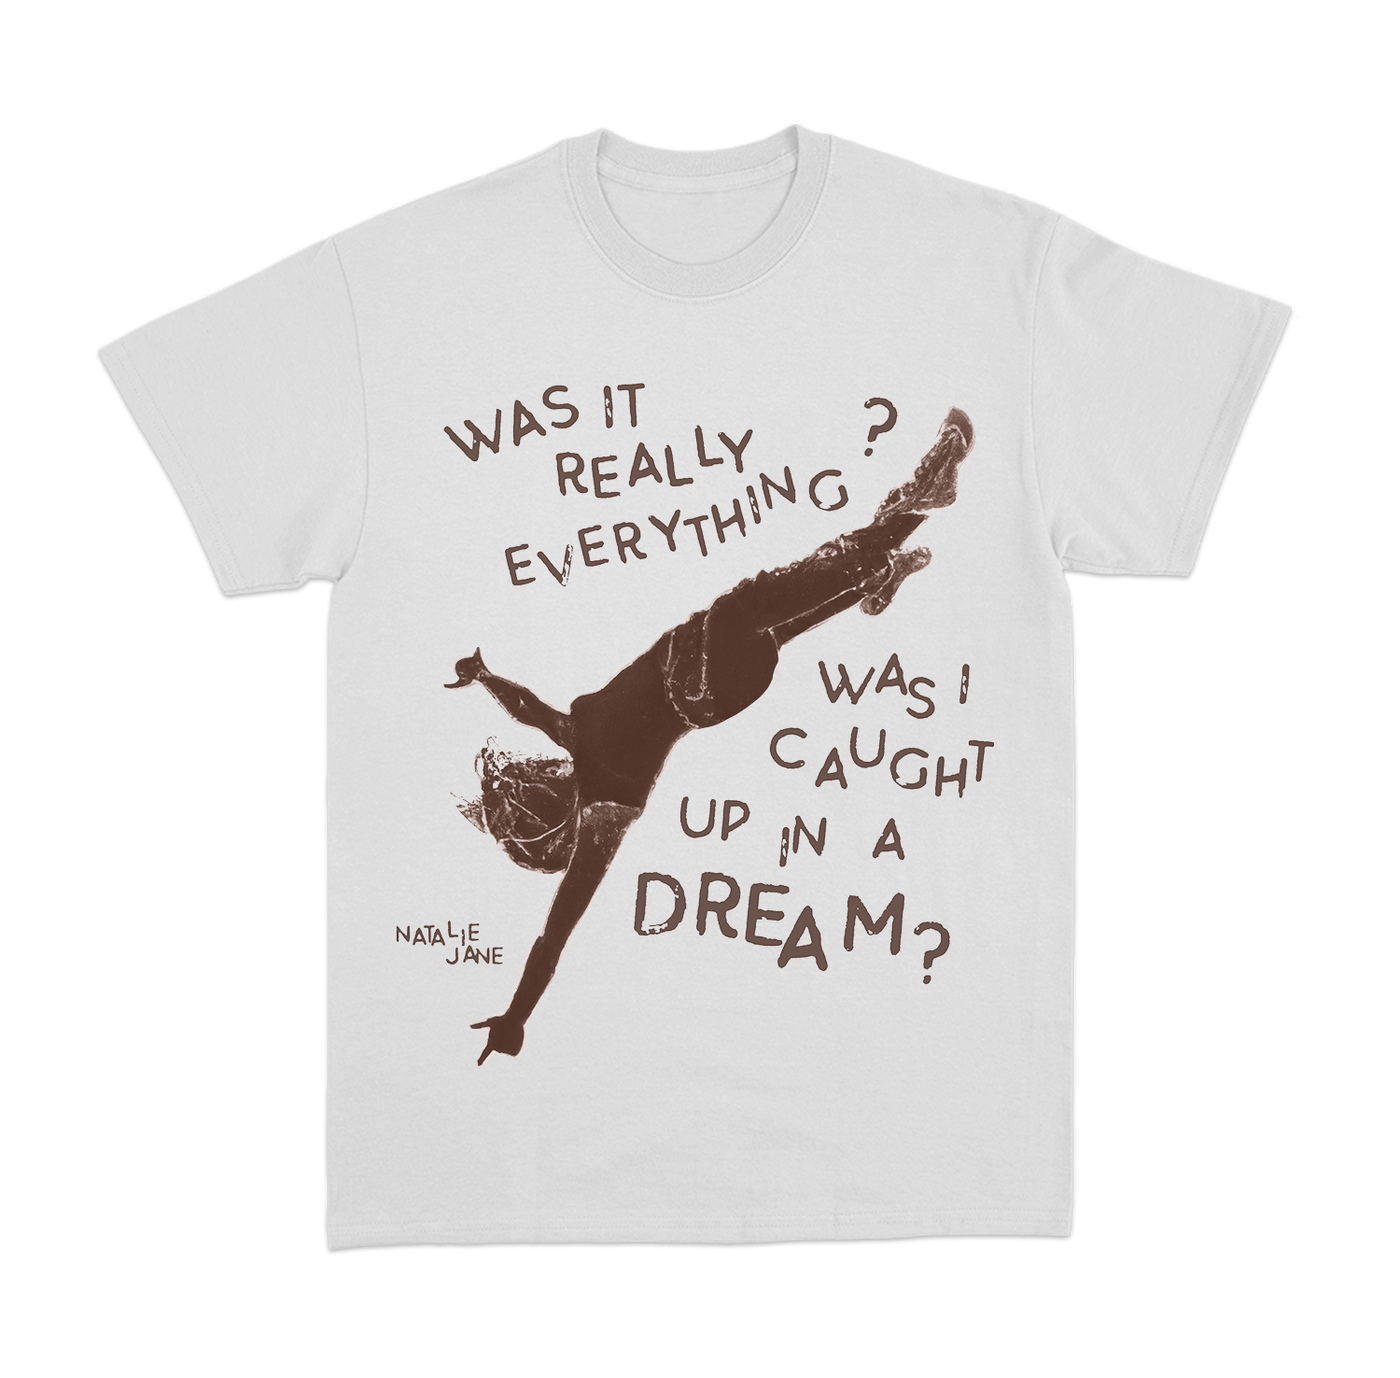 "Was It Really Everything?" Tee